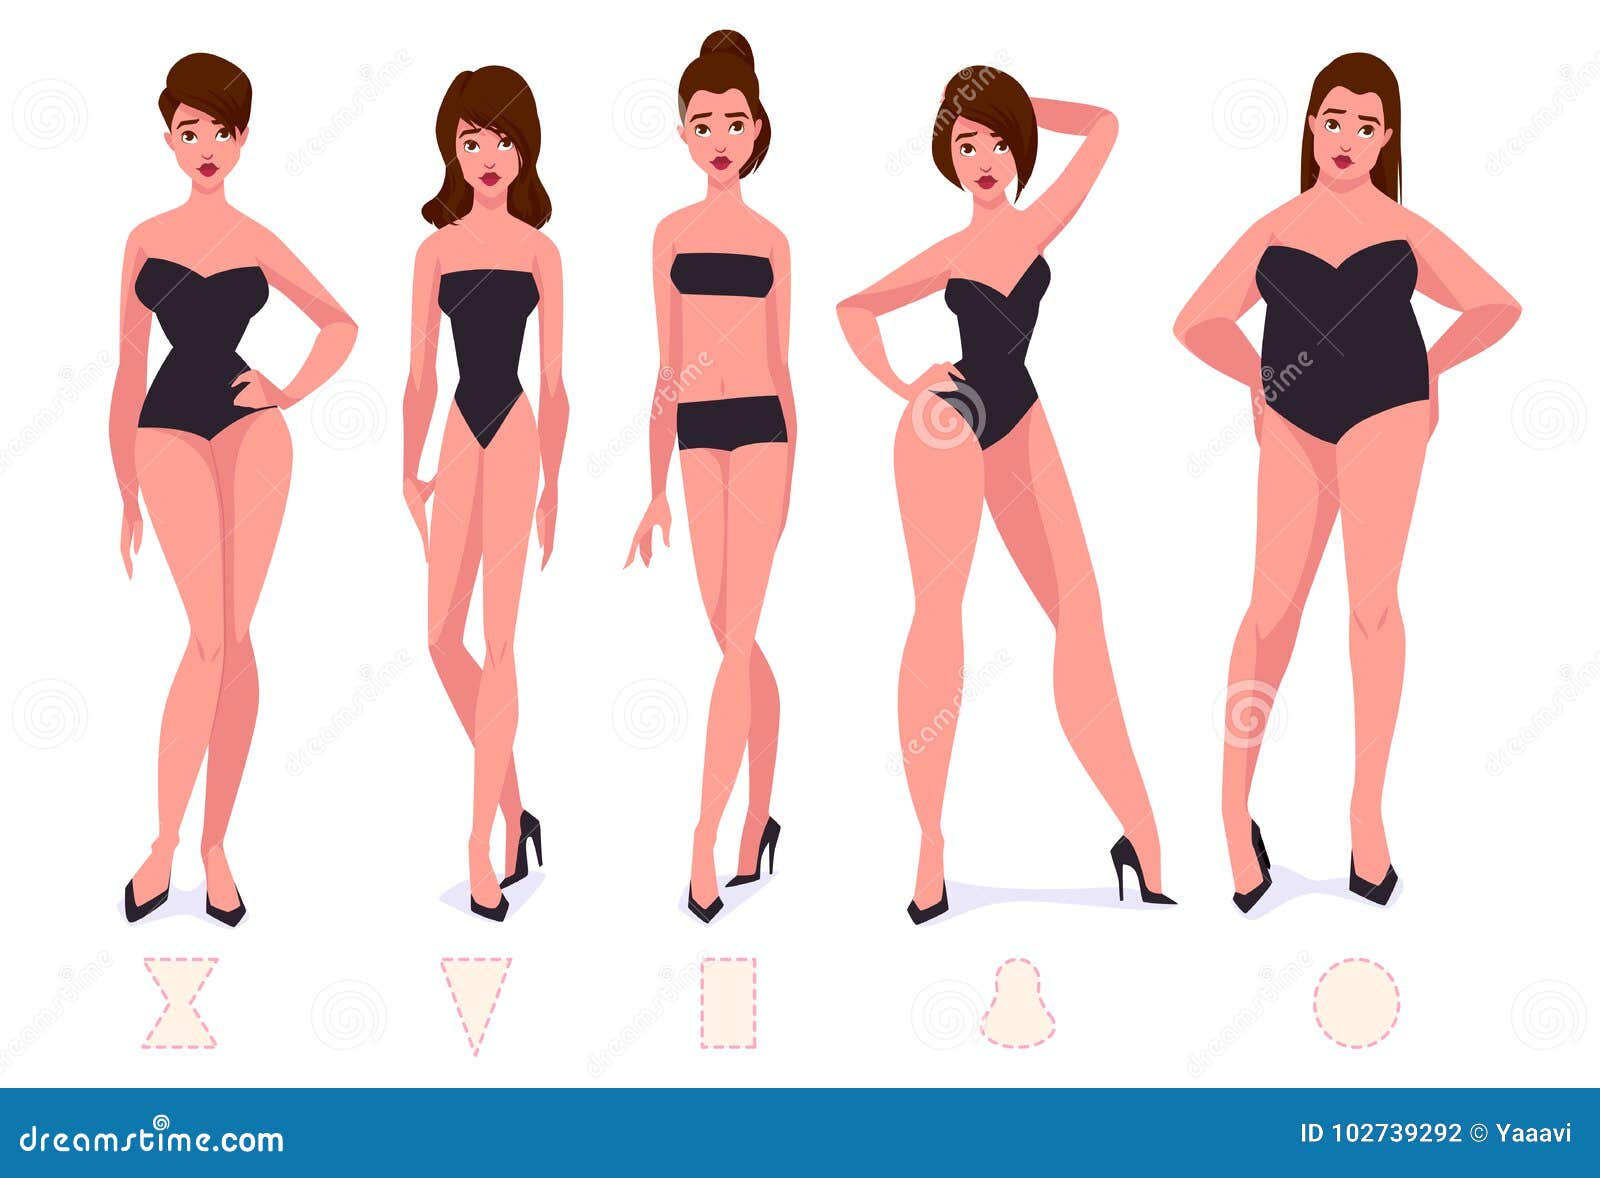 Human Body Shapes Woman Breast Form Set Bra Types Vector Stock